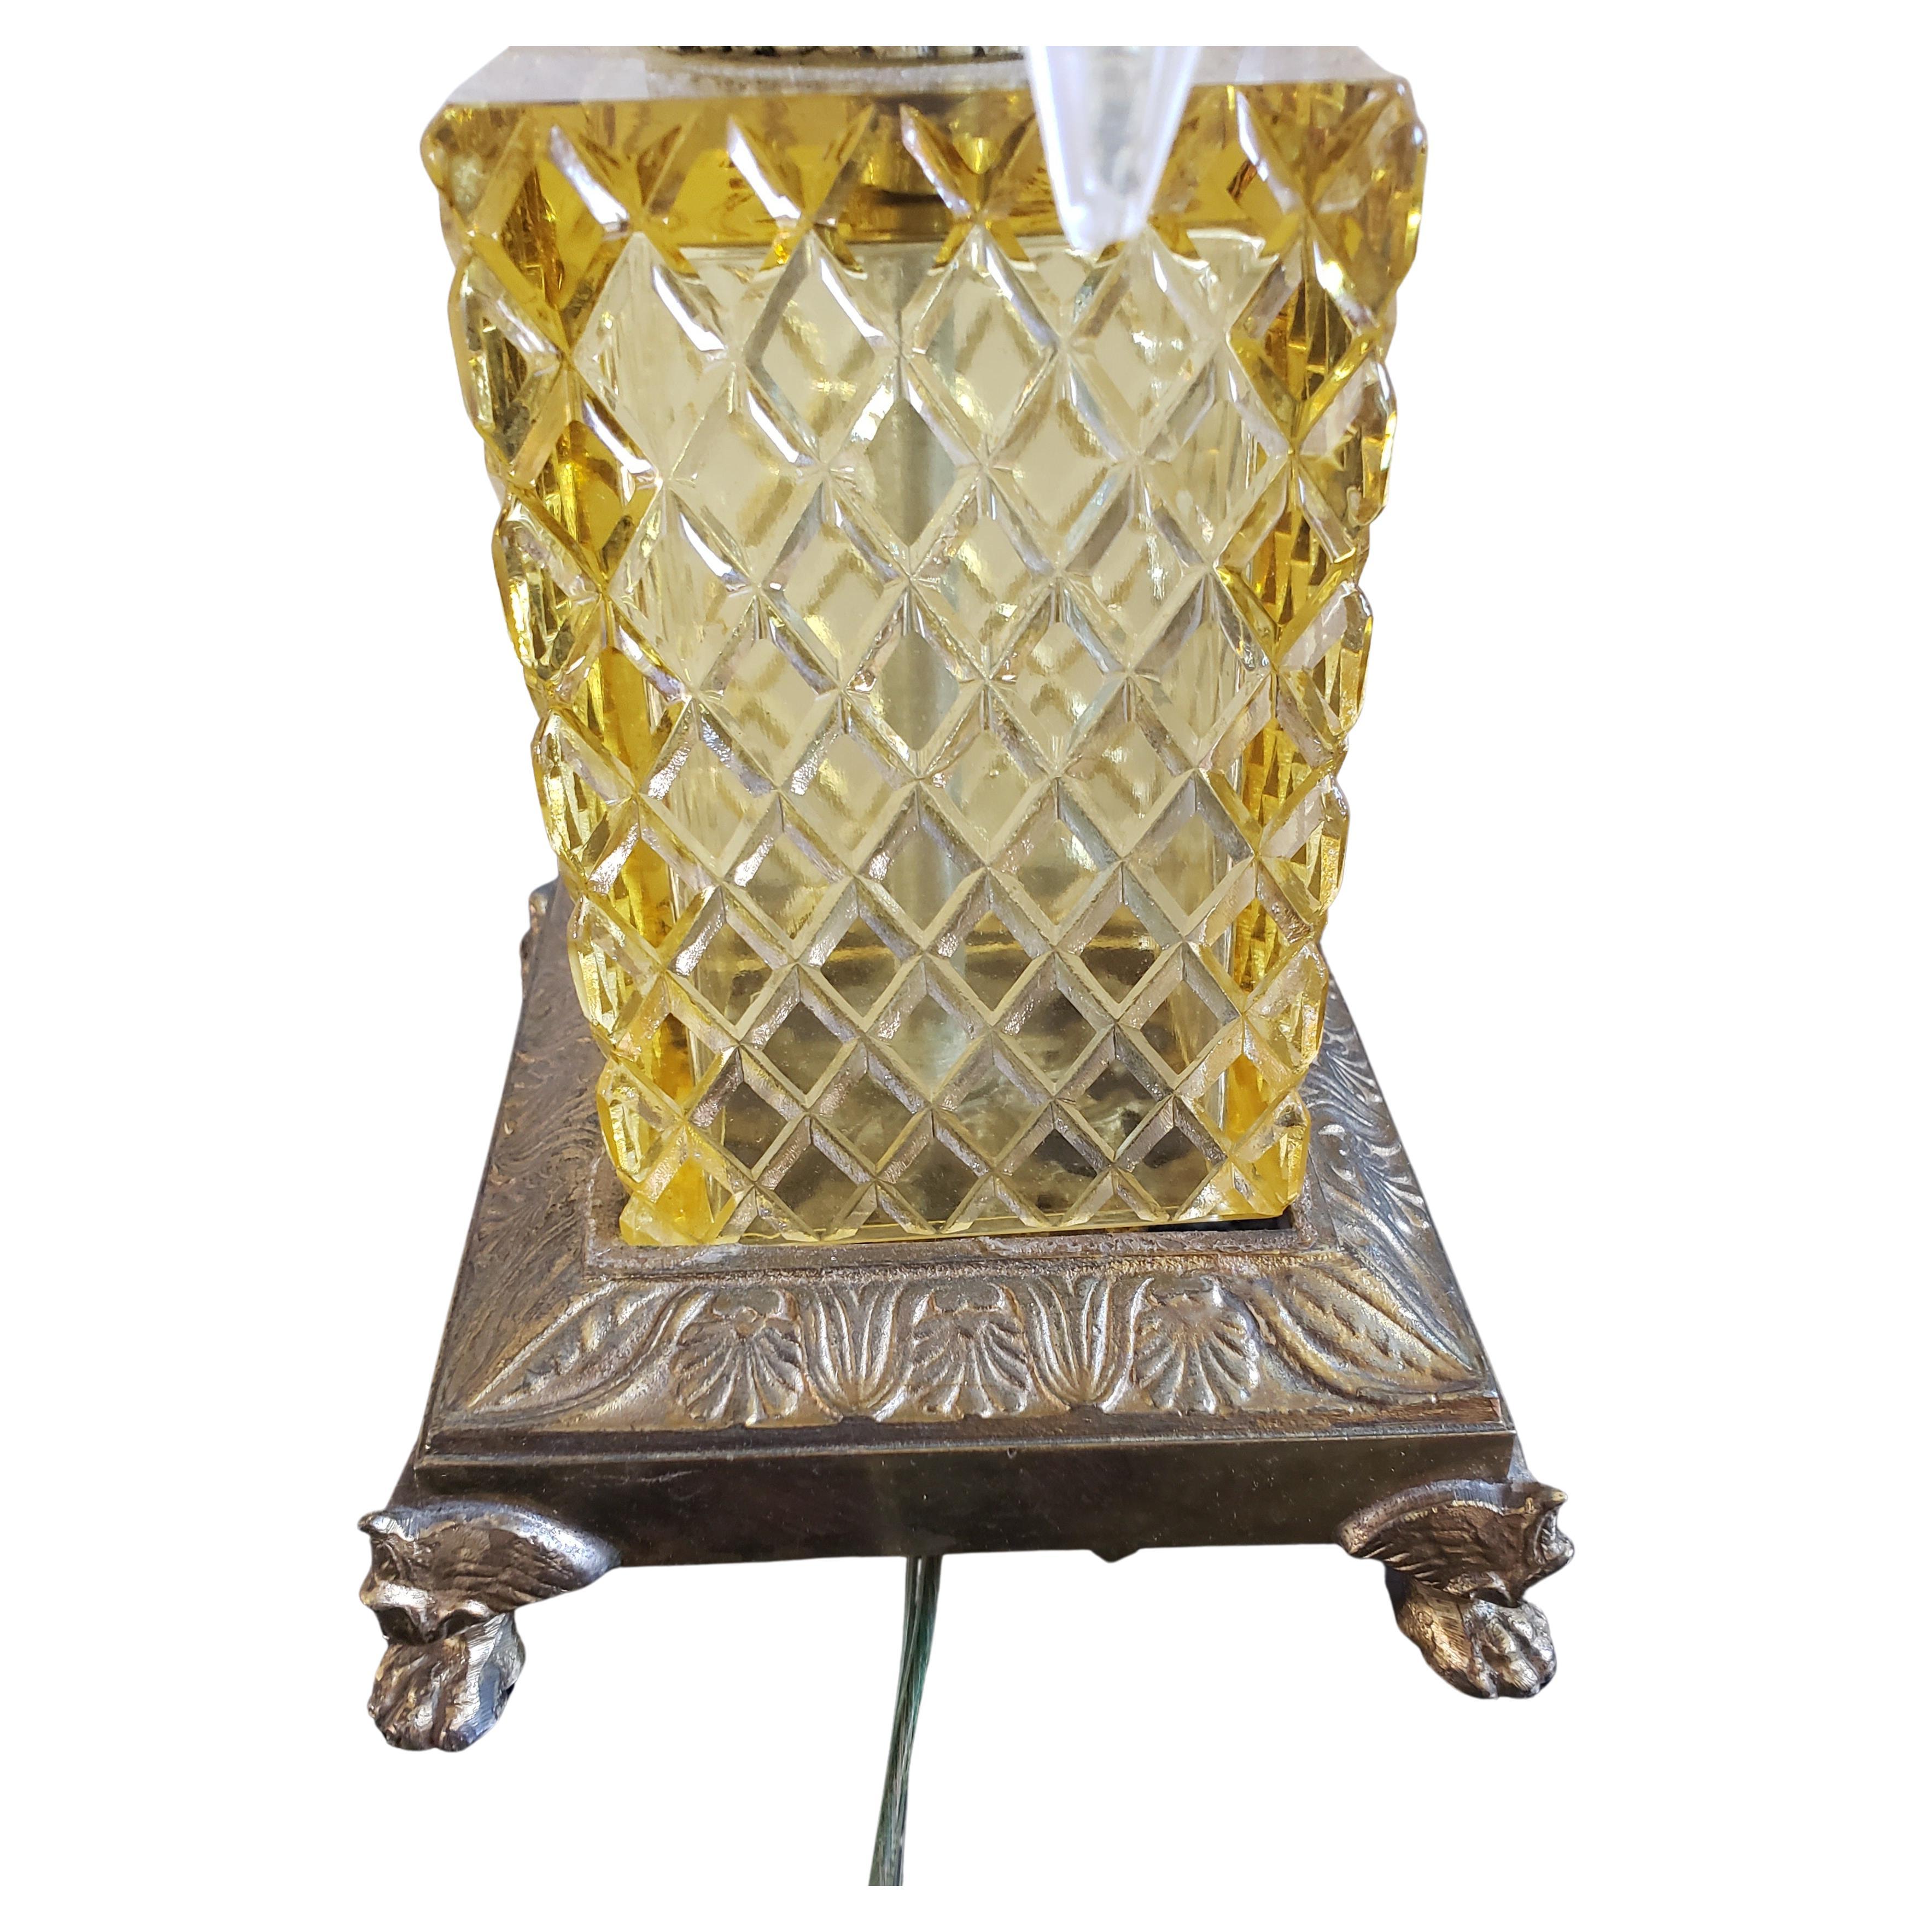 American 1930s Solid Brass Glass Cut and Lead Crystal Arrow Pendulums Table Lamp For Sale